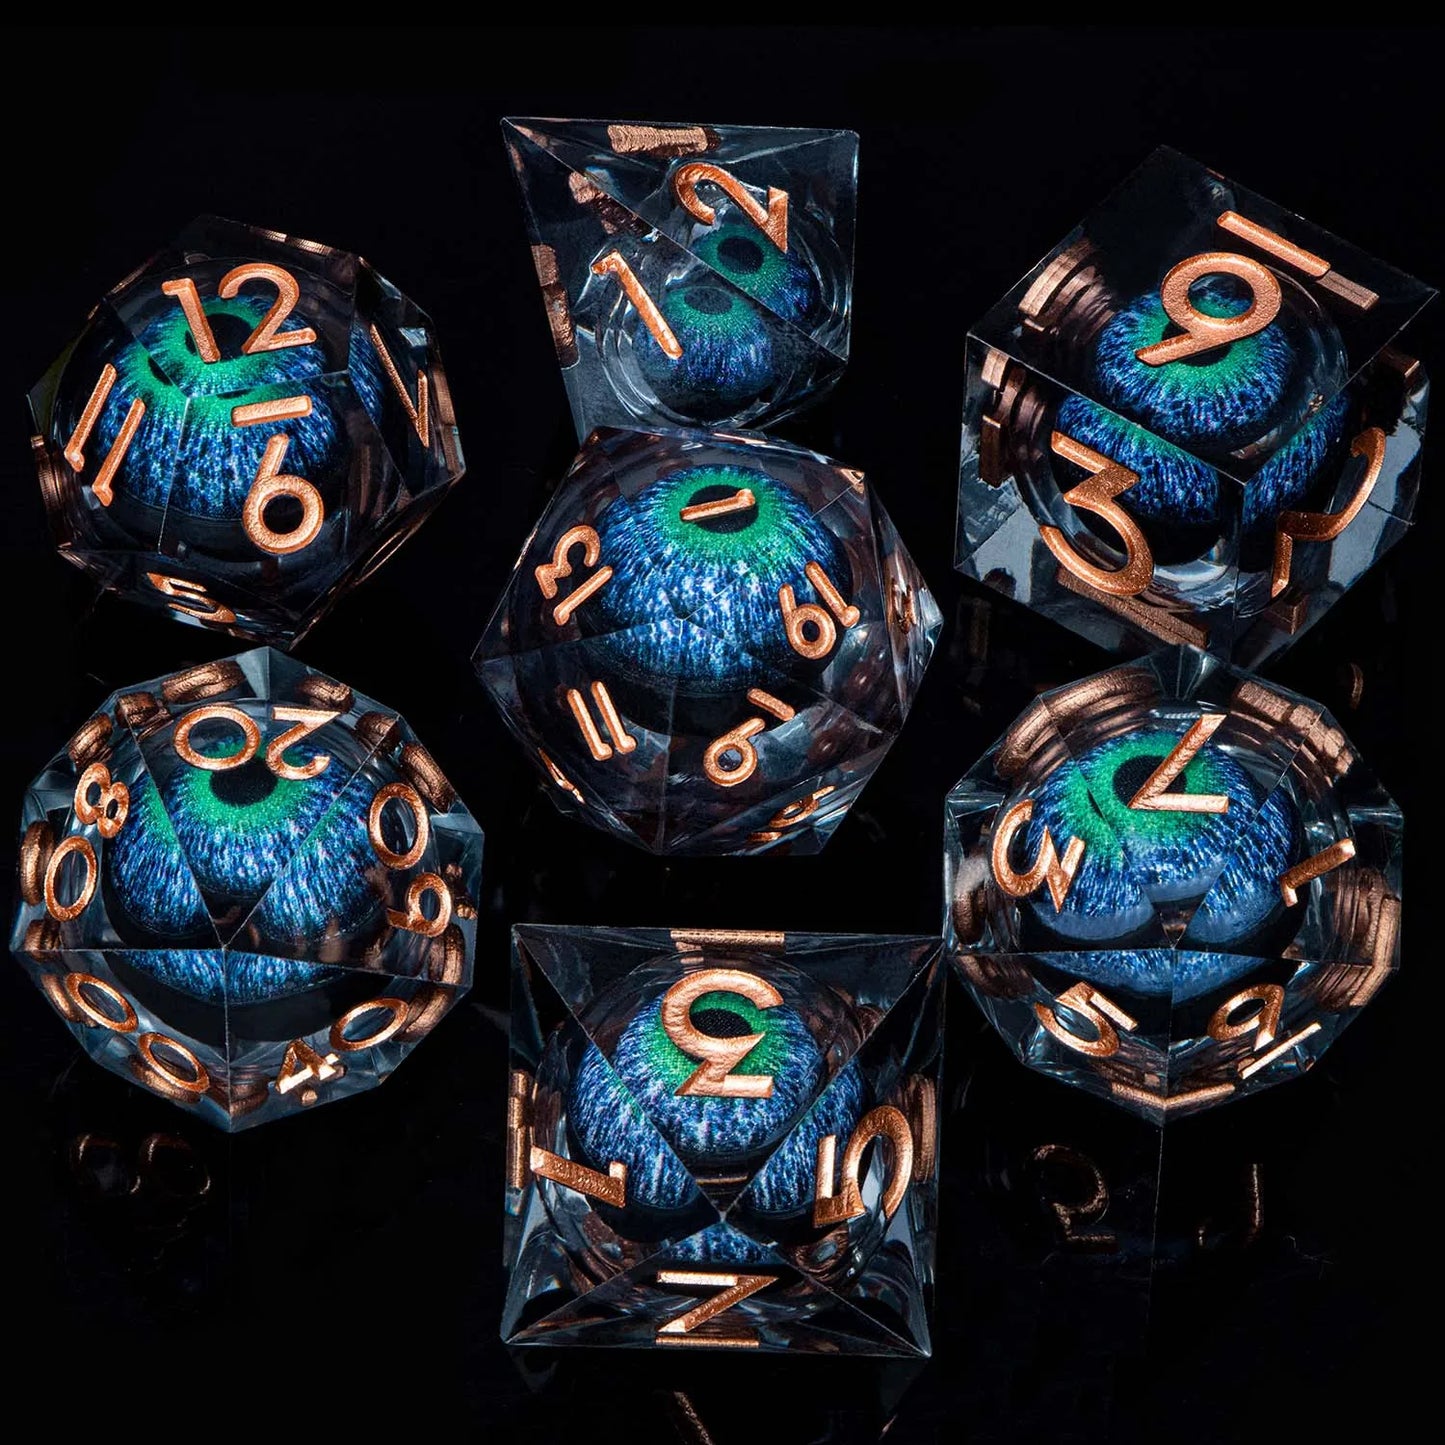 ORIFANTOU DND Red Rings & Liquid Flow Eye Sharp Edge Resin Dice Set D&D Dungeon and Dragon Handmade D20 D and D Polyhedral Dice YY-16